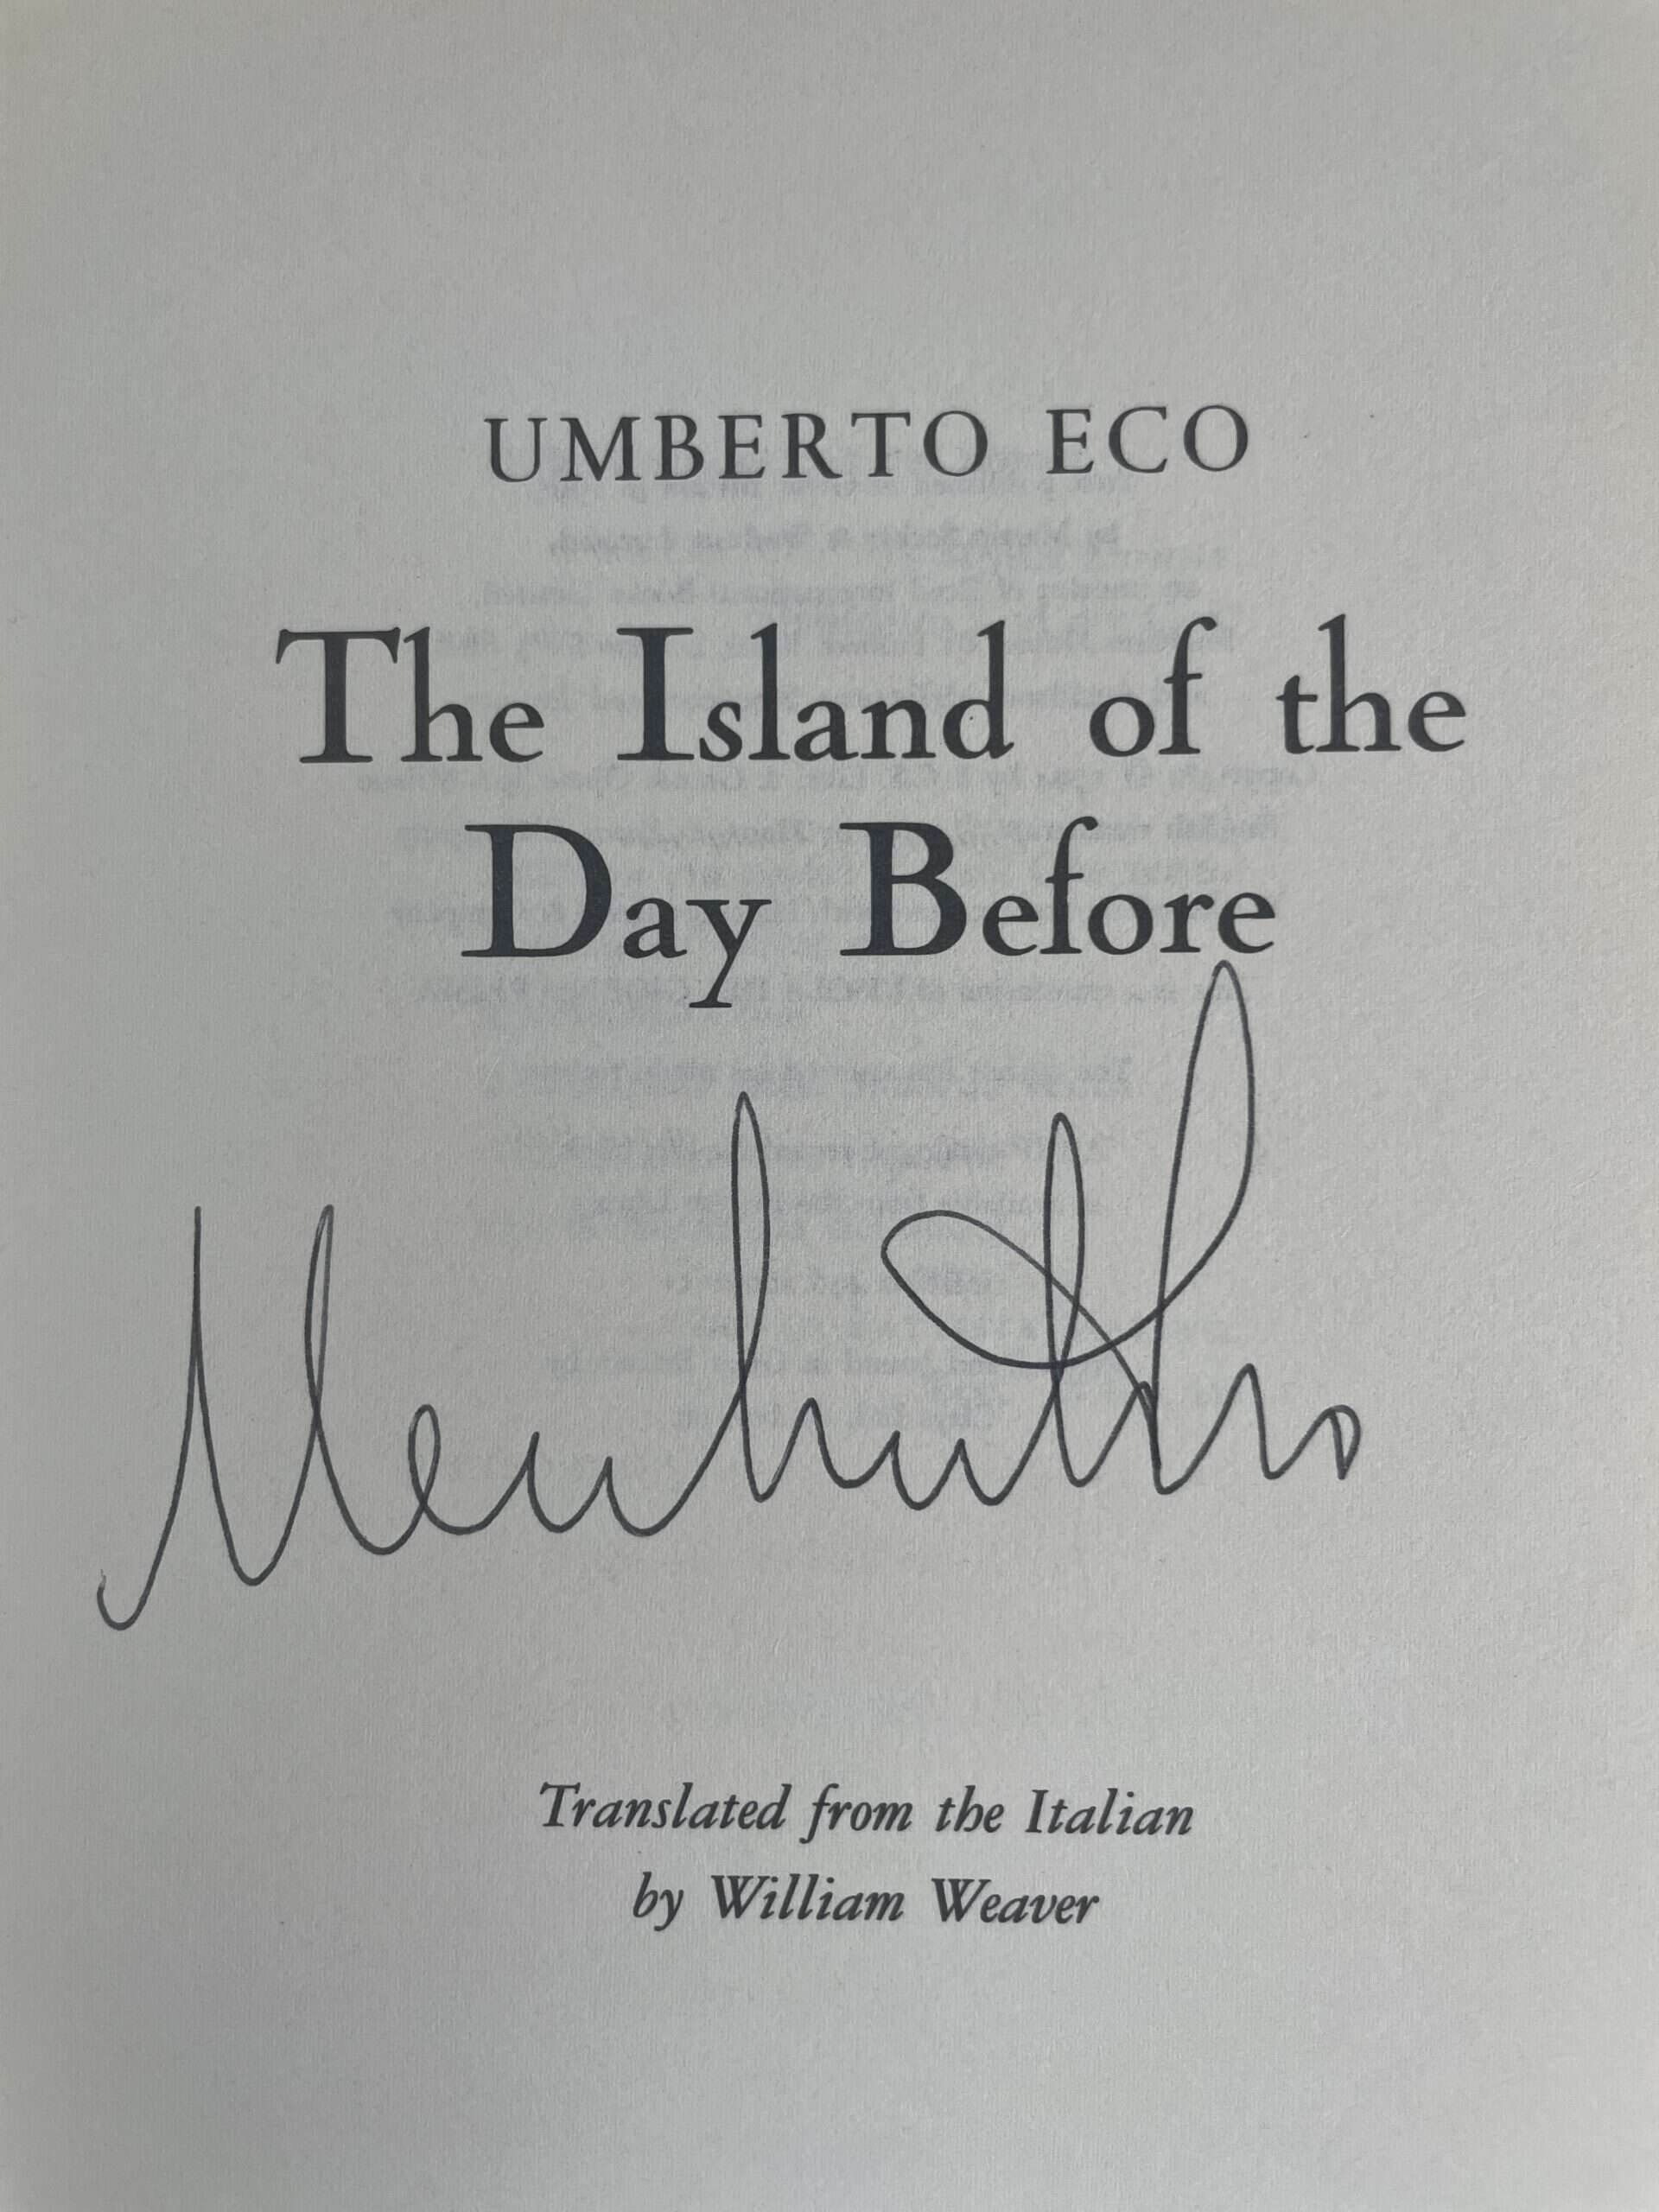 umberto eco the island of the dayu before signed first ed2